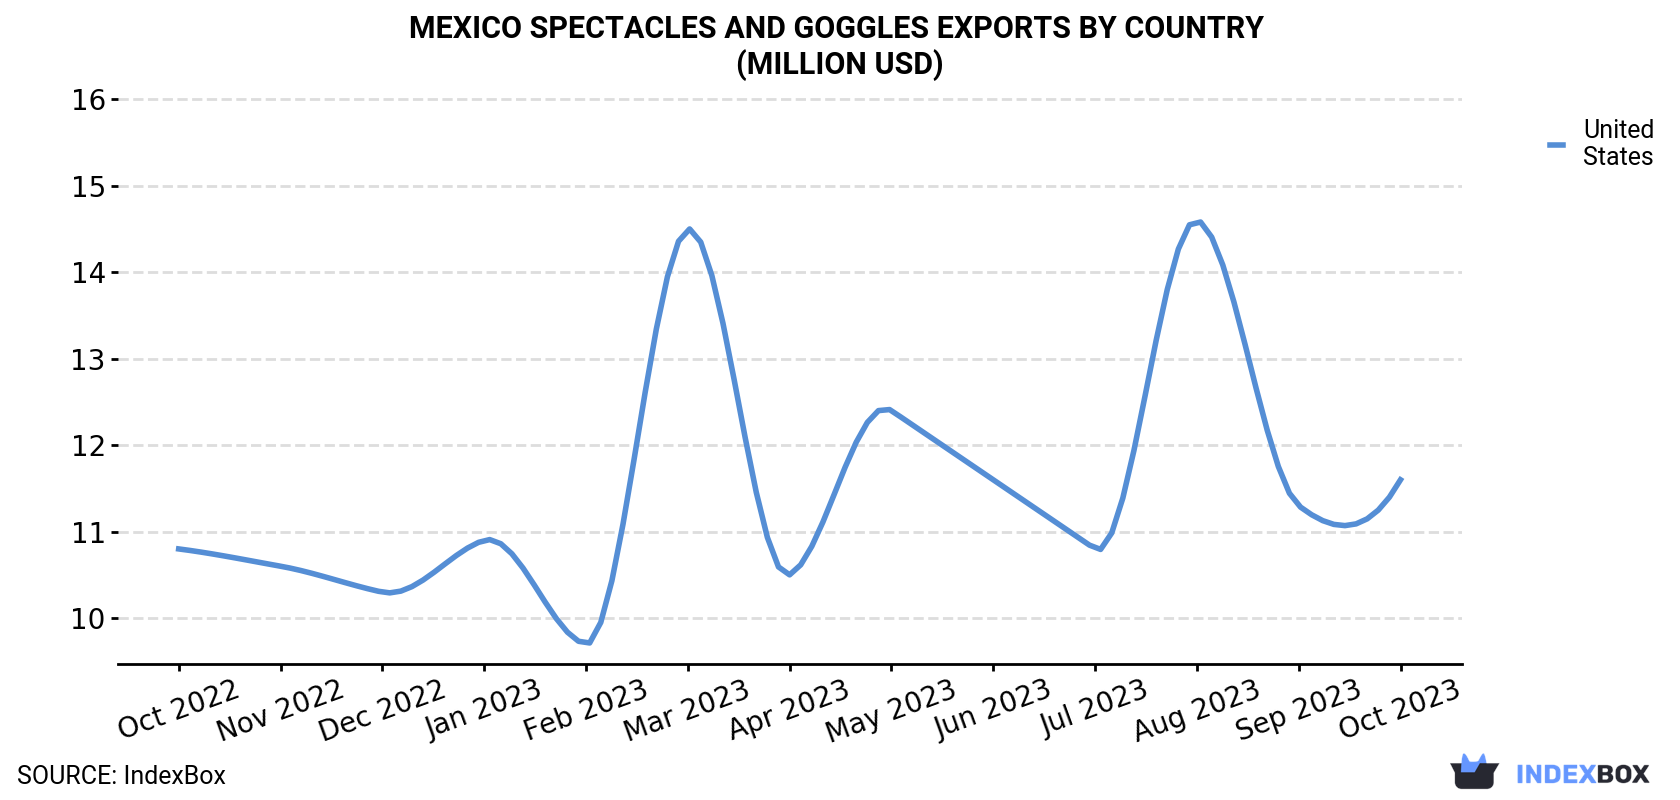 Mexico Spectacles And Goggles Exports By Country (Million USD)